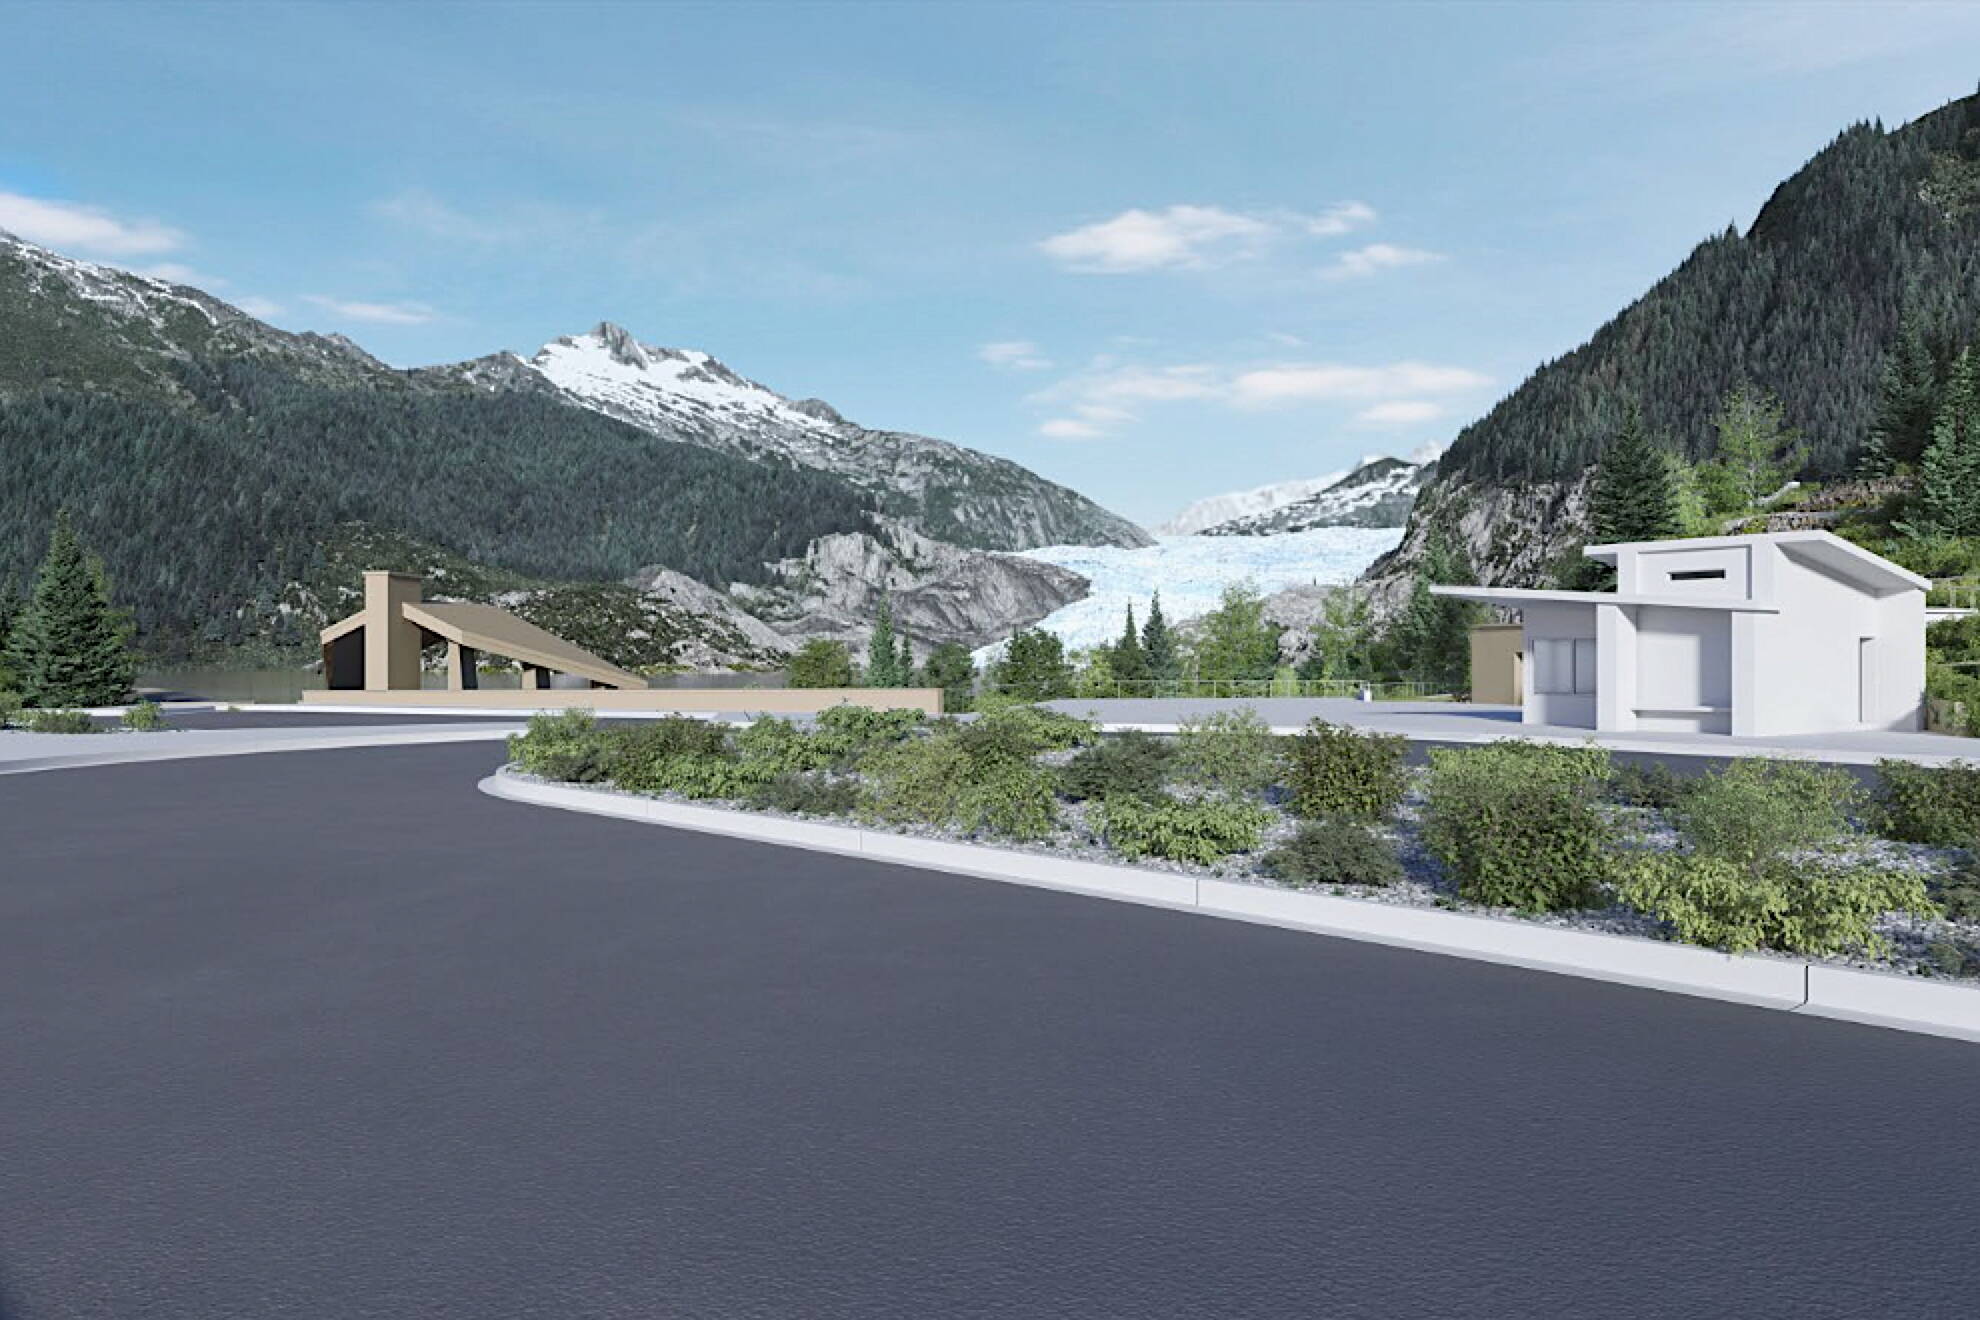 An illustration shows a new Welcome Center and plaza area at the Mendenhall Glacier Recreation Area as proposed in May. The facilities approved in a Notice of Decision on Thursday are similar, but are being relocated further from the face of the glacier to the existing commercial overflow parking lot. (Image from the Notice of Decision published by the U.S. Forest Service).